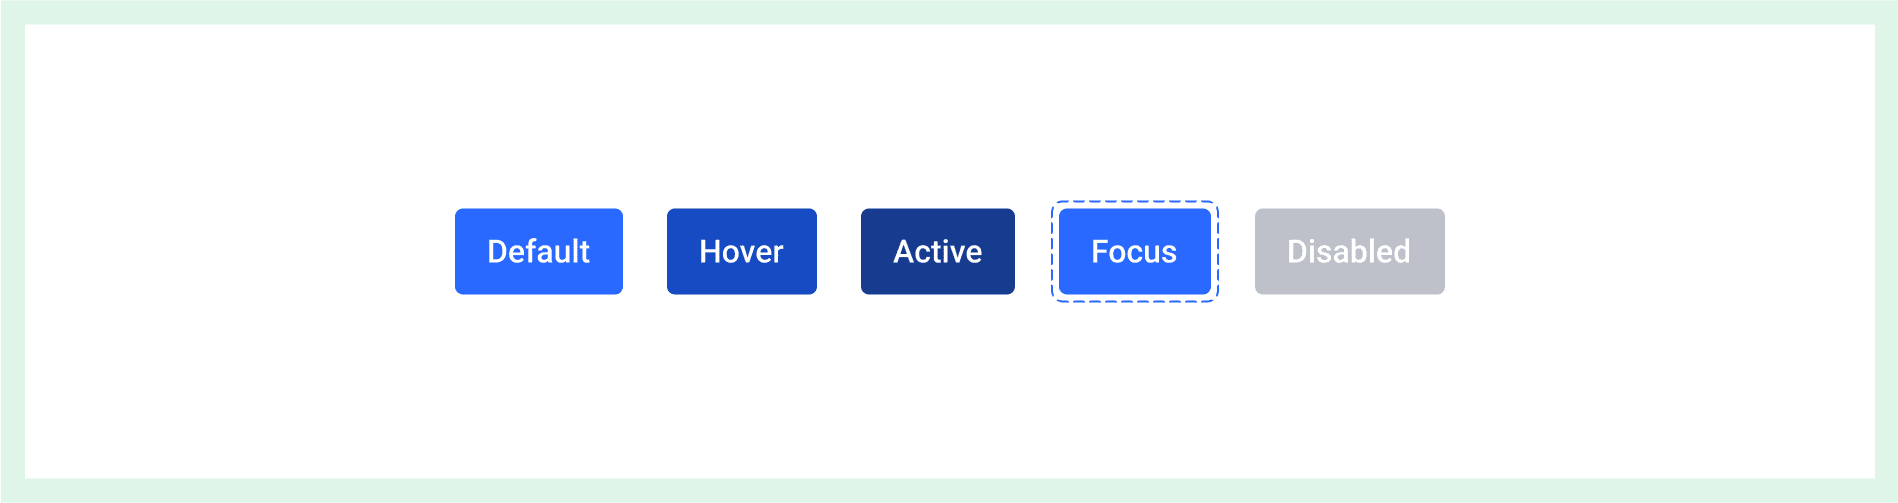 Visualization of several visually distinct states for a button — default, hover, active, focus, and disabled